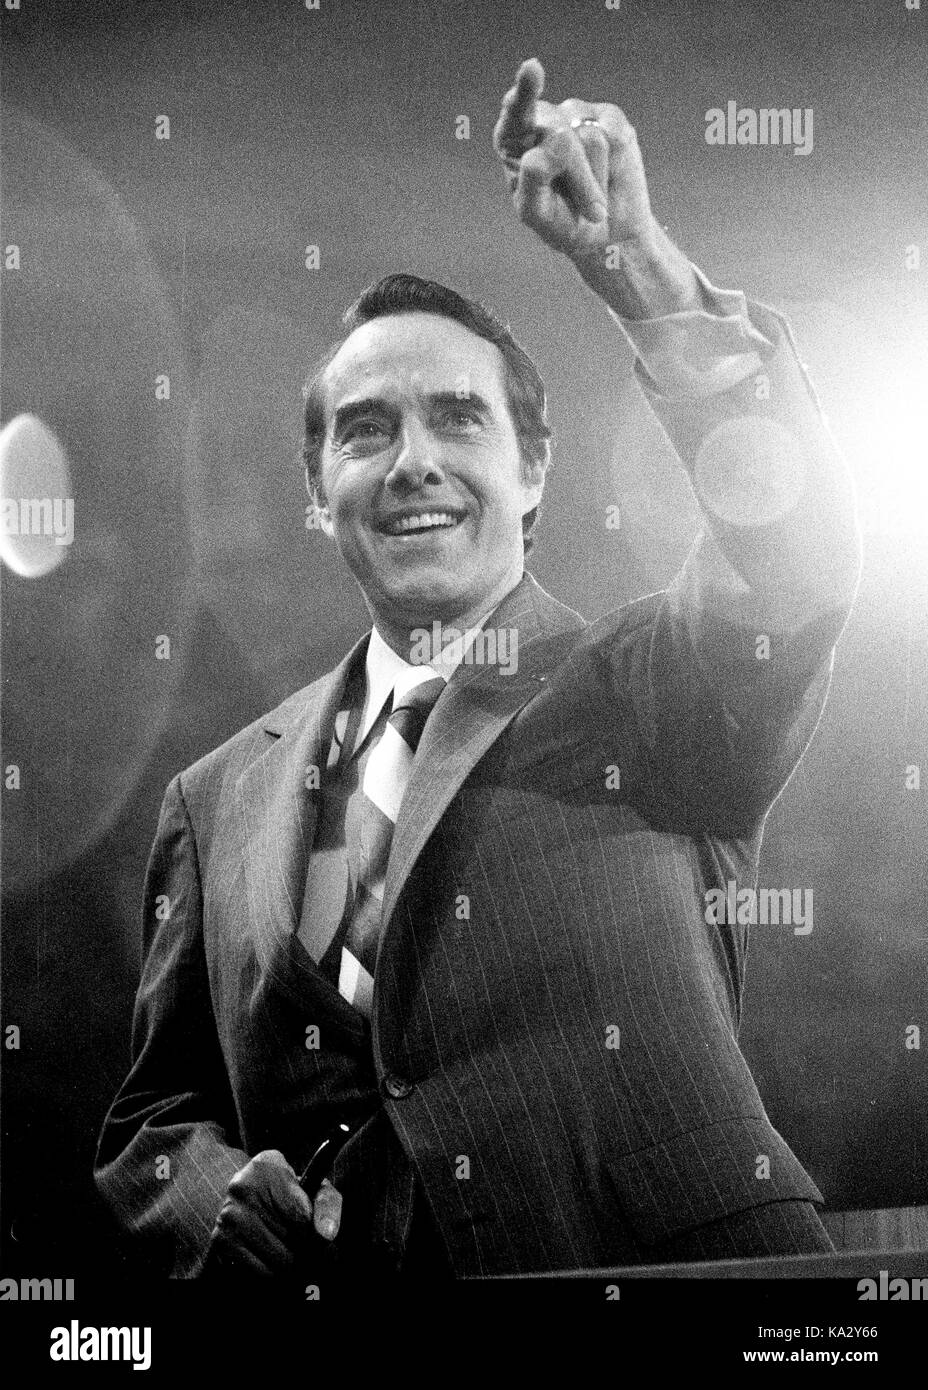 United States Senator Bob Dole (Republican of Kansas), the 1976 Republican nominee for Vice President of the United States, speaks at the Republican National Convention at the Kemper Arena in Kansas City, Missouri on August 19, 1976. Credit: Arnie Sachs/CNP - NO WIRE SERVICE - Photo: Arnie Sachs/Consolidated News Photos/Arnie Sachs - CNP Stock Photo